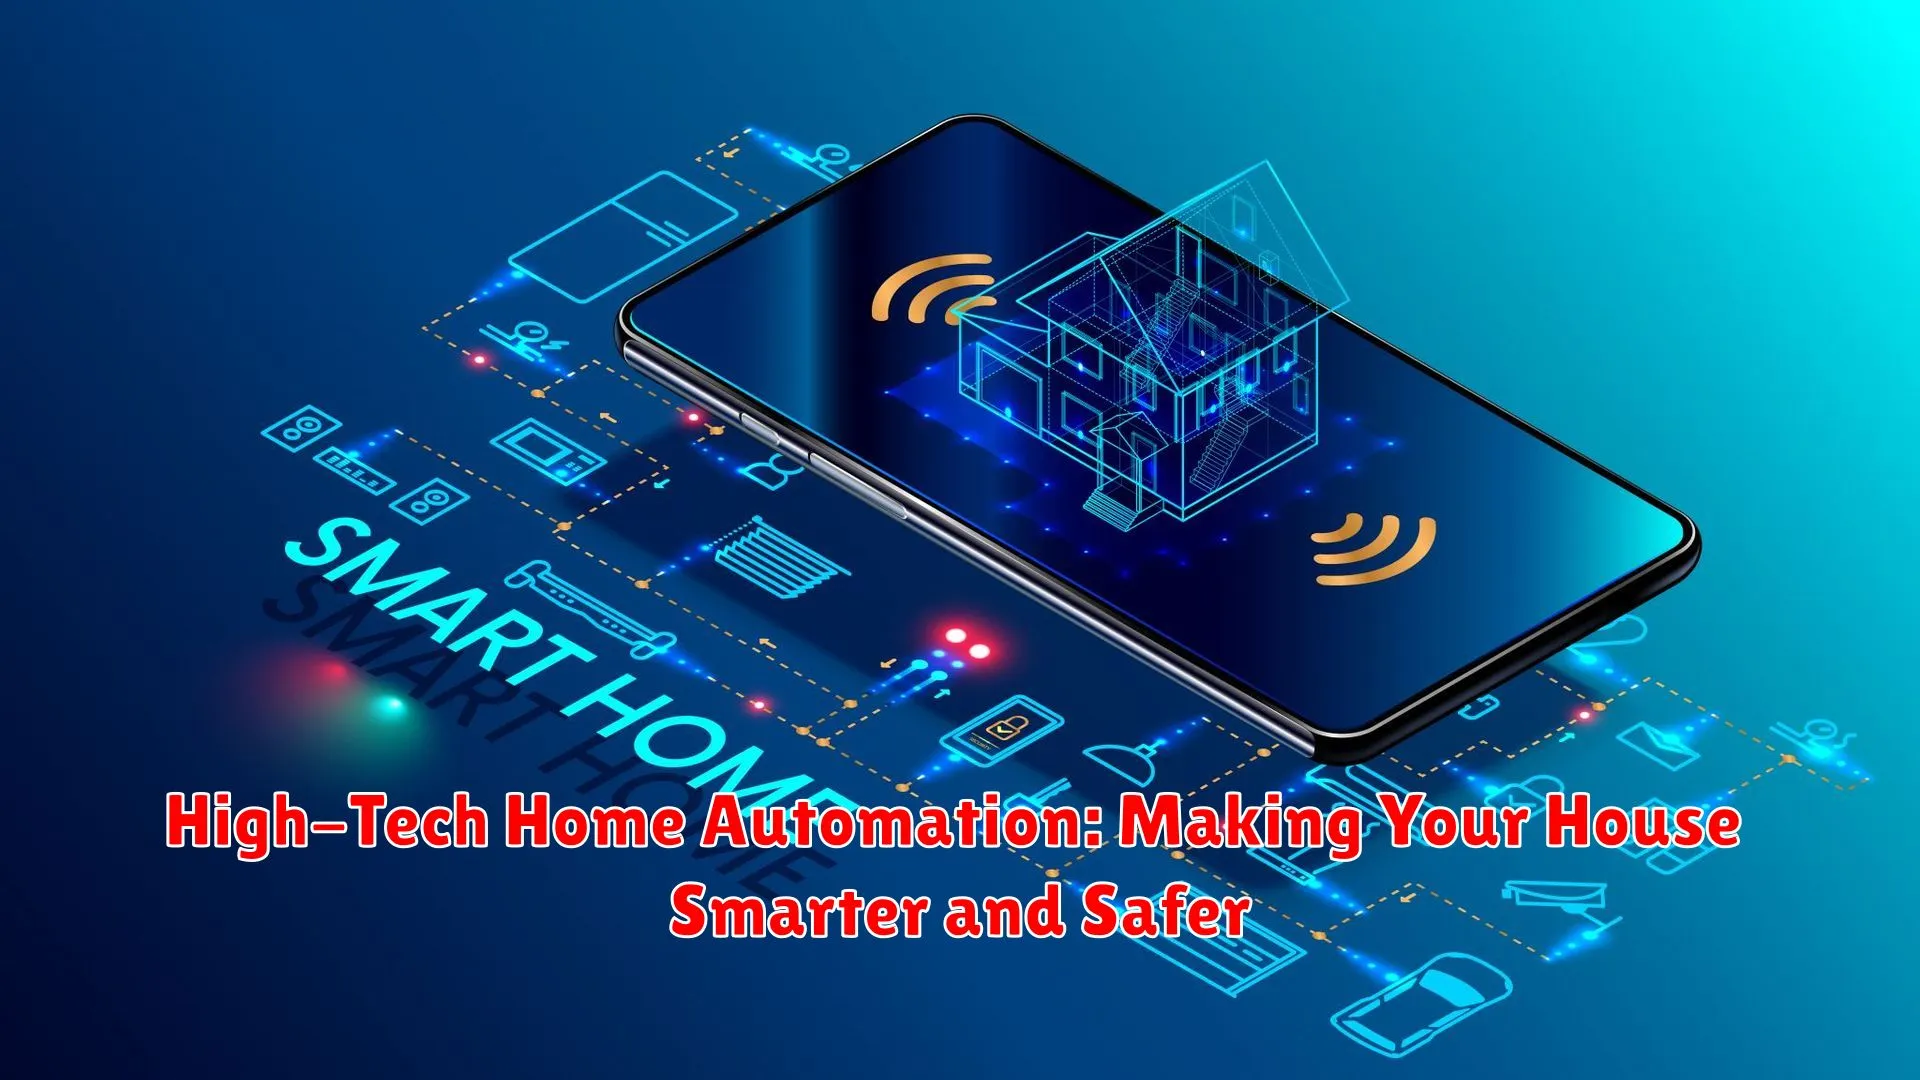 High-Tech Home Automation: Making Your House Smarter and Safer